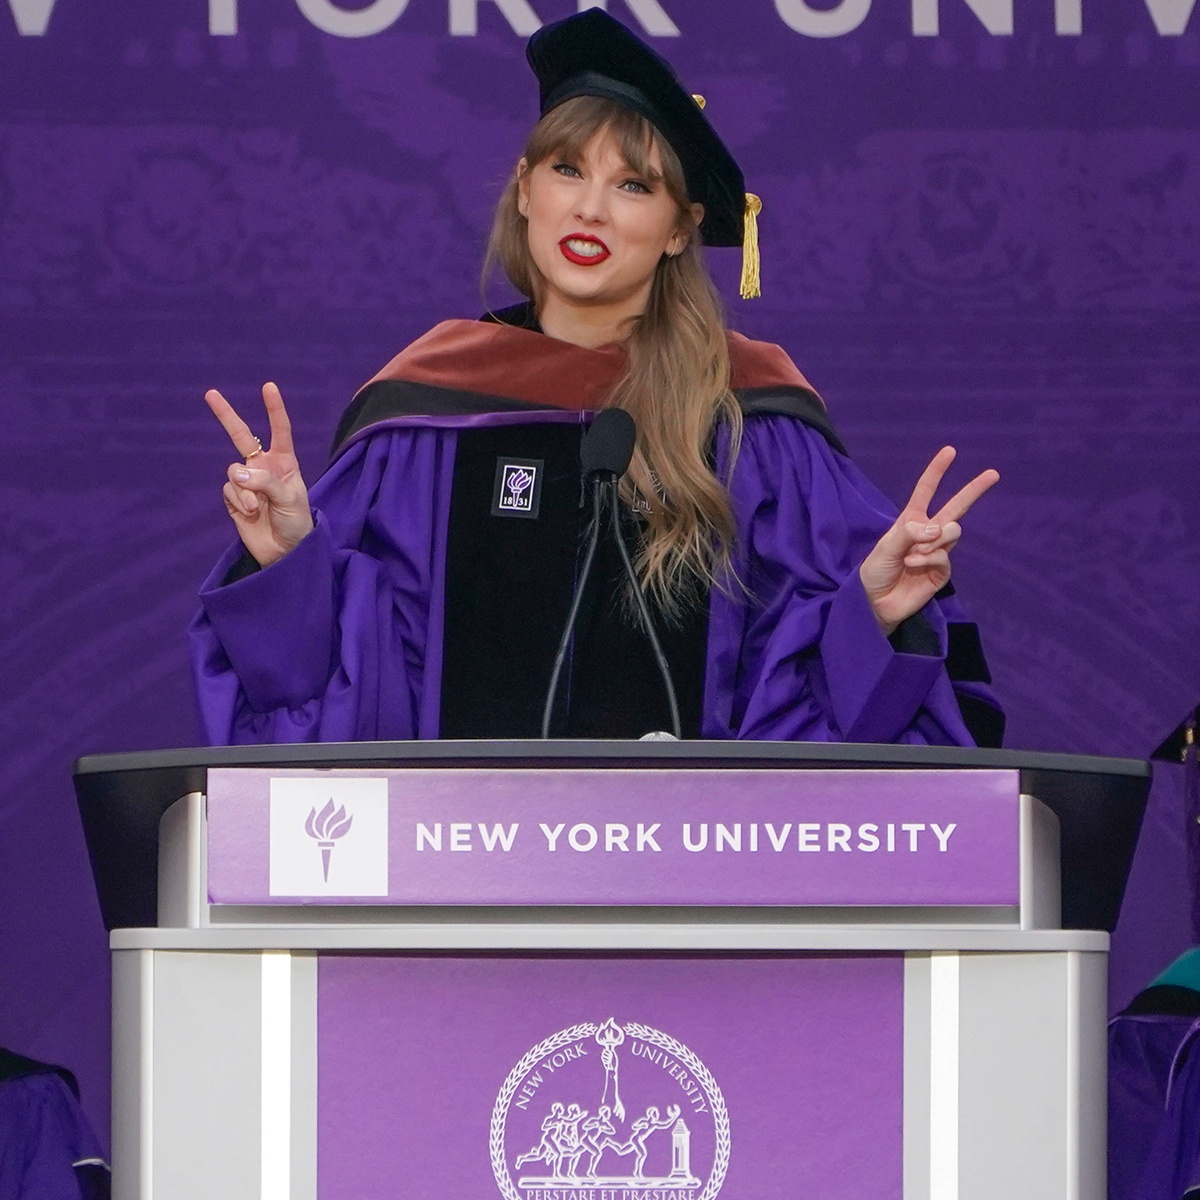 Taylor Swift Reflects On "Getting Canceled" and Criticized Over Love Life in Candid Commencement Speech